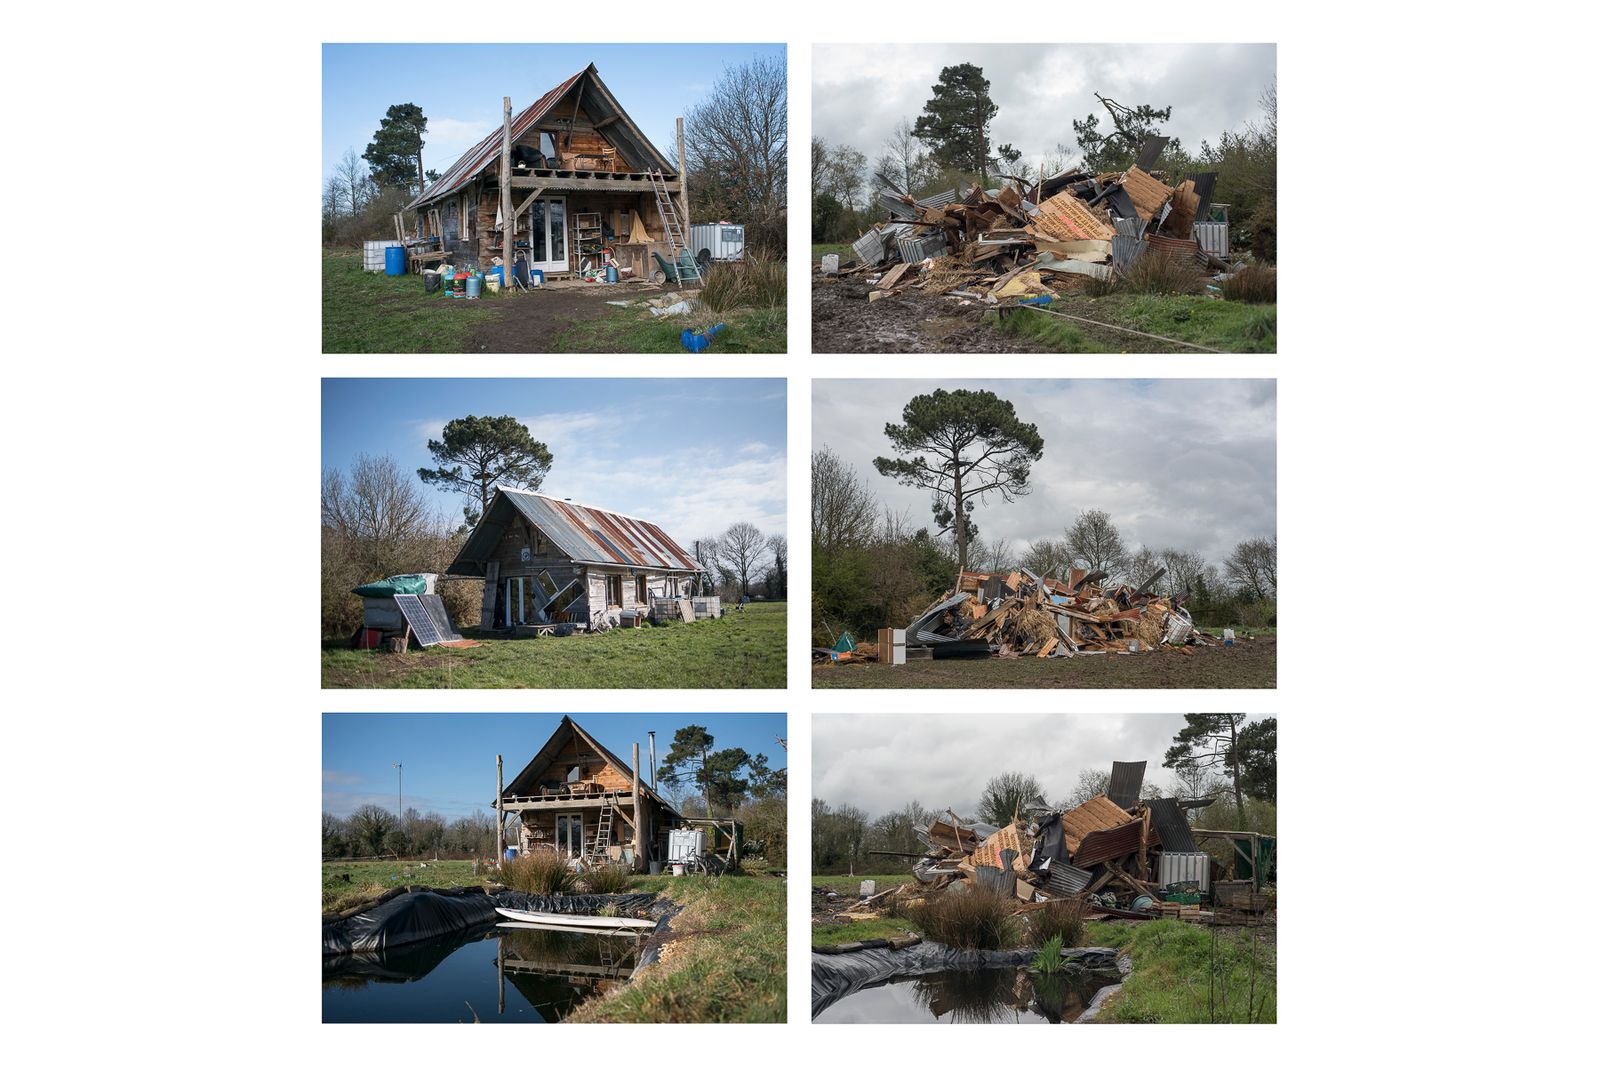 © Penelope Thomaidi - Living space in 100 Noms before and after the eviction operations, ZAD of Notre Dame des Landes, France, March-April, 2018.